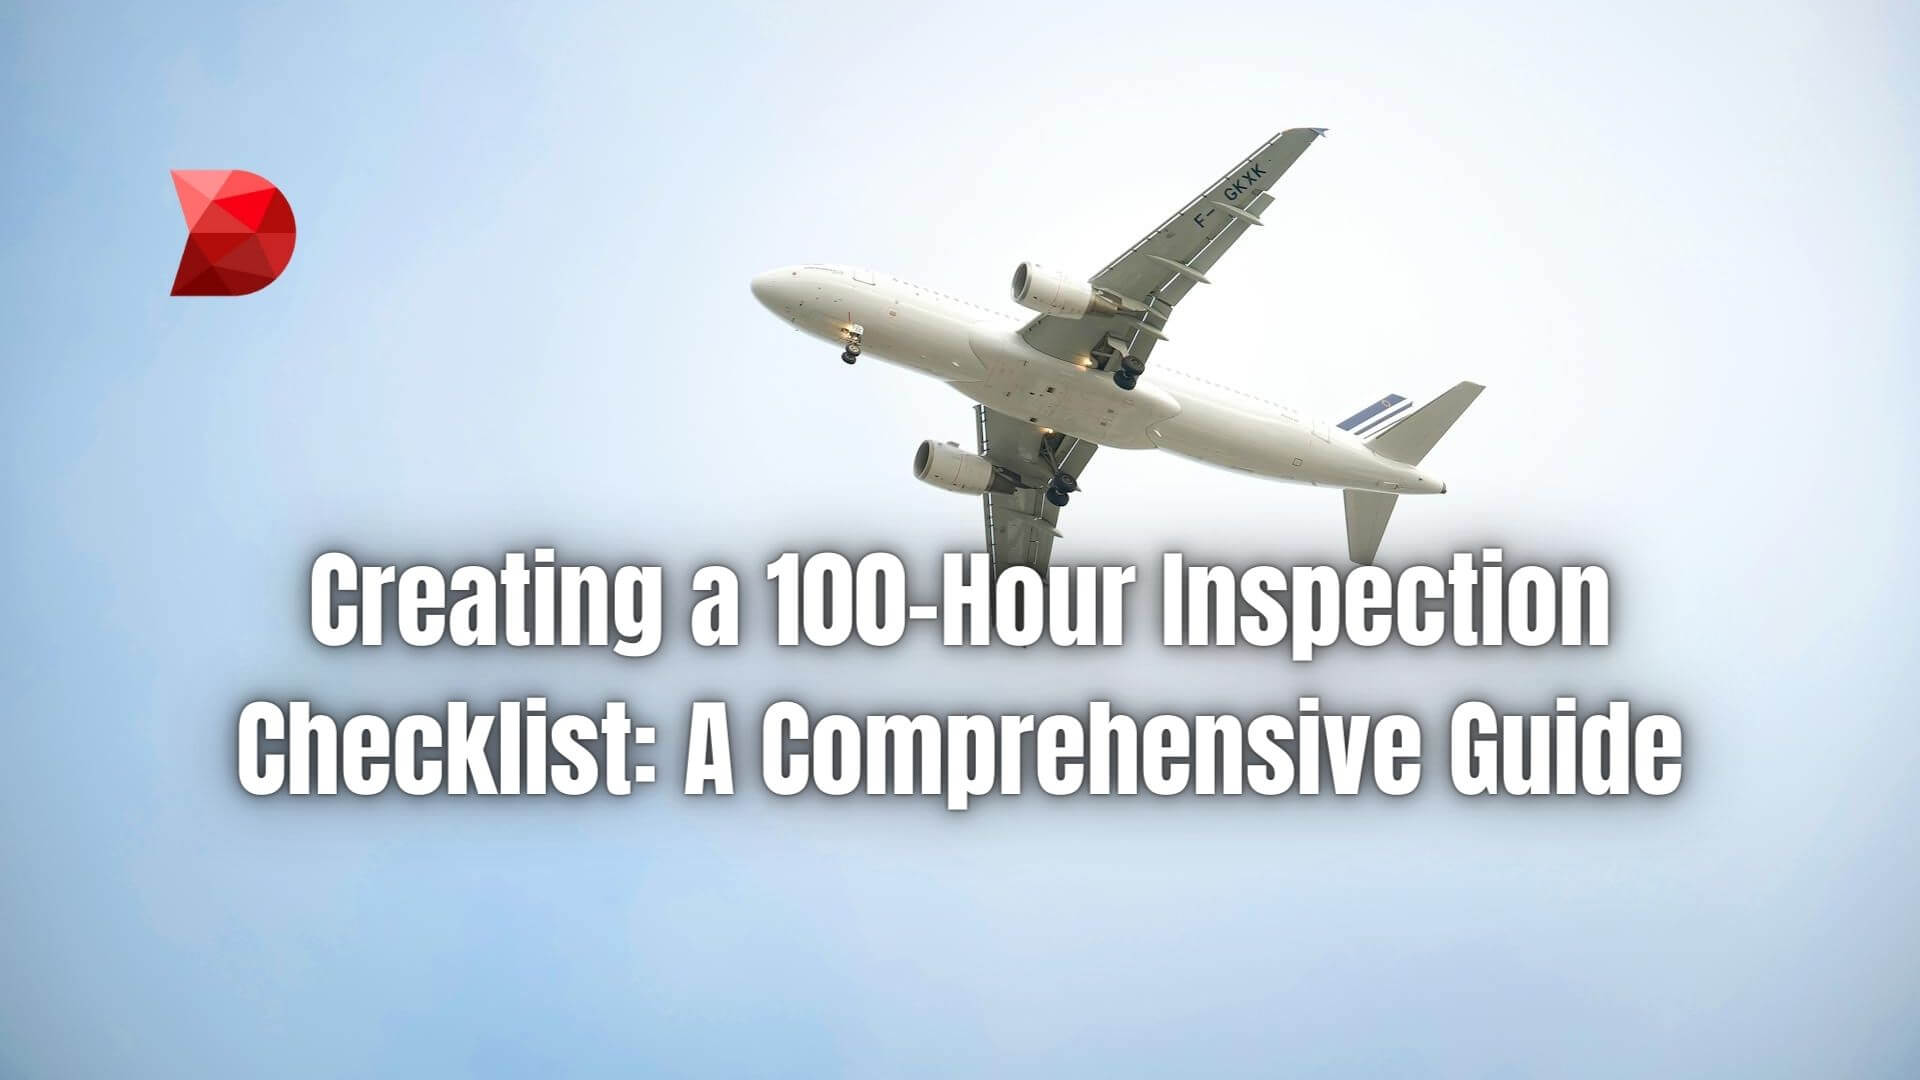 Navigate the complexities of aircraft maintenance with ease. Click here to learn how to create a foolproof 100-hour inspection checklist!